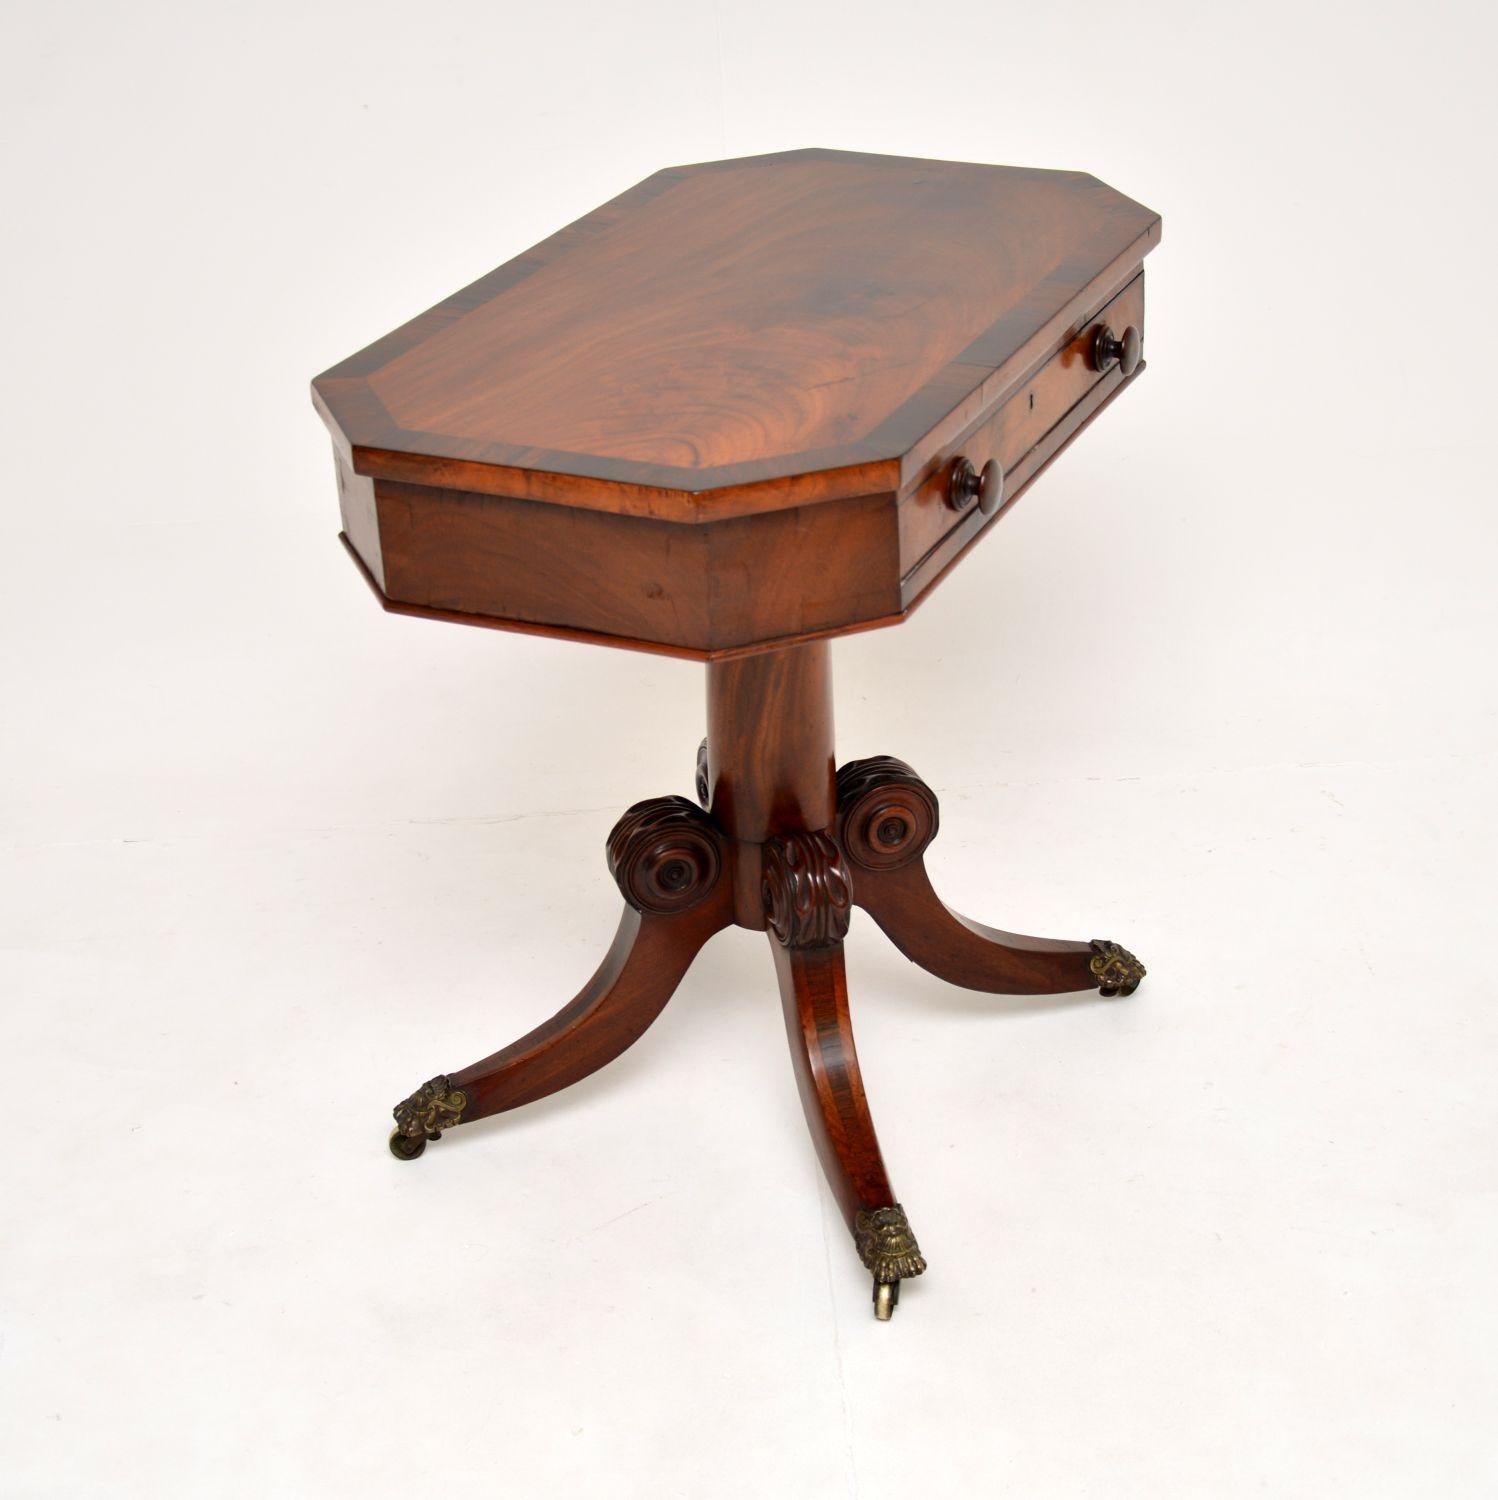 British Antique Regency Period Inlaid Side Table For Sale